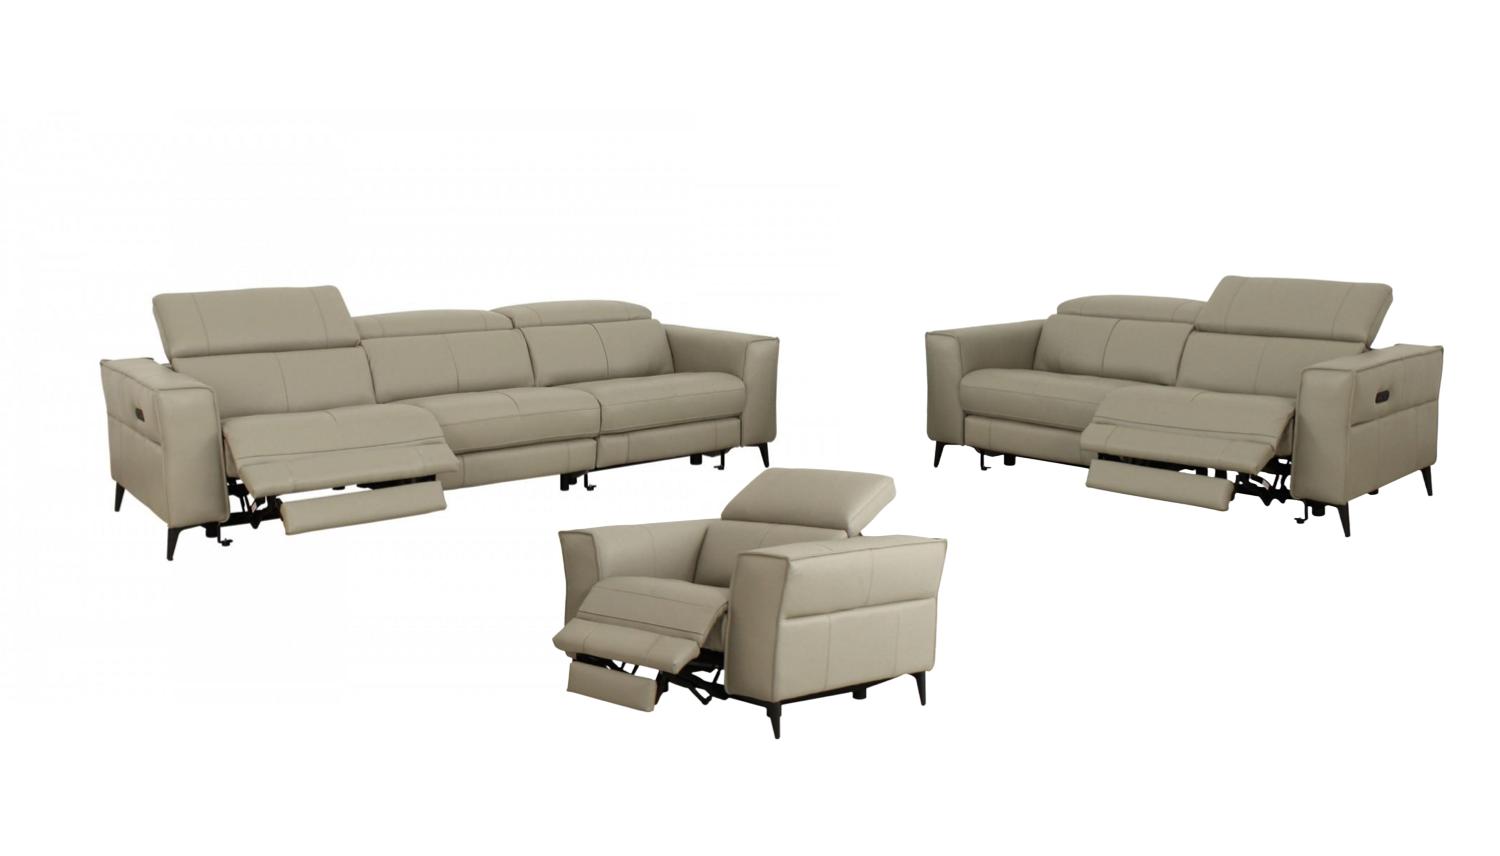 Modern Sofa Loveseat and Chair Set Nella VGKNE9193-LTGRY-4S-3pcs in Beige Leather